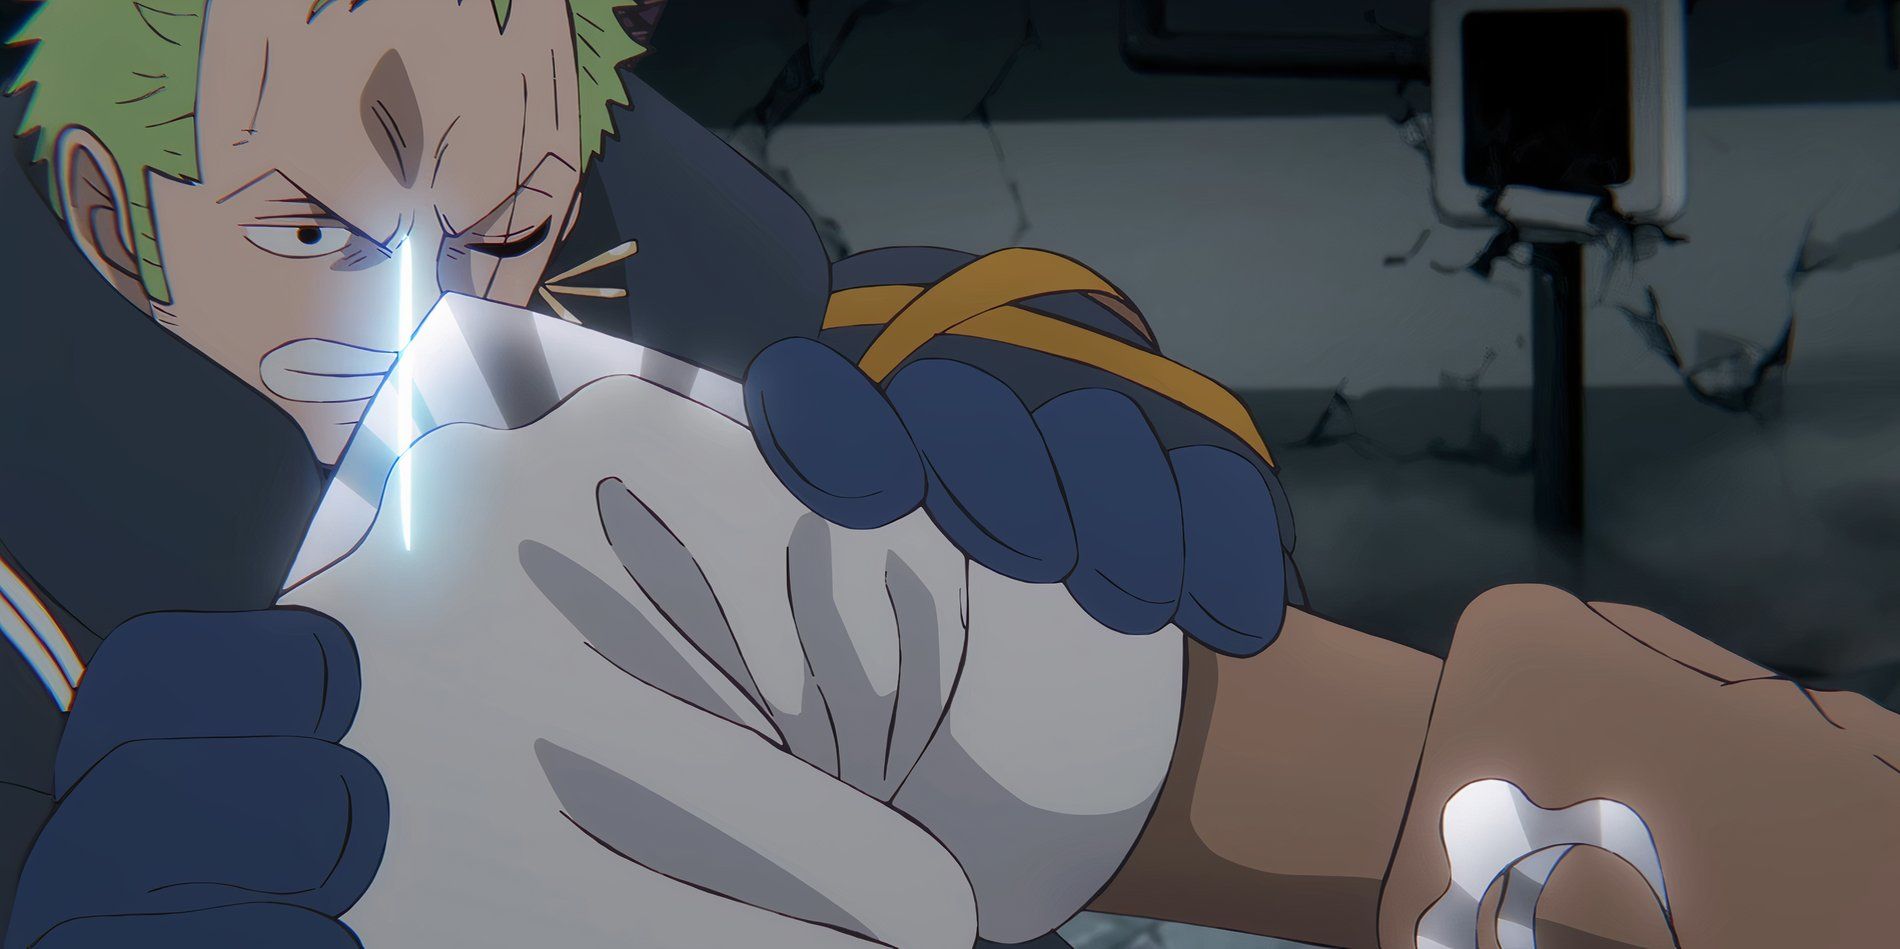 One Piece Anime Episode 1109 Seraphim S-Hawk fights against Zoro and forms a Blade from his elbow.